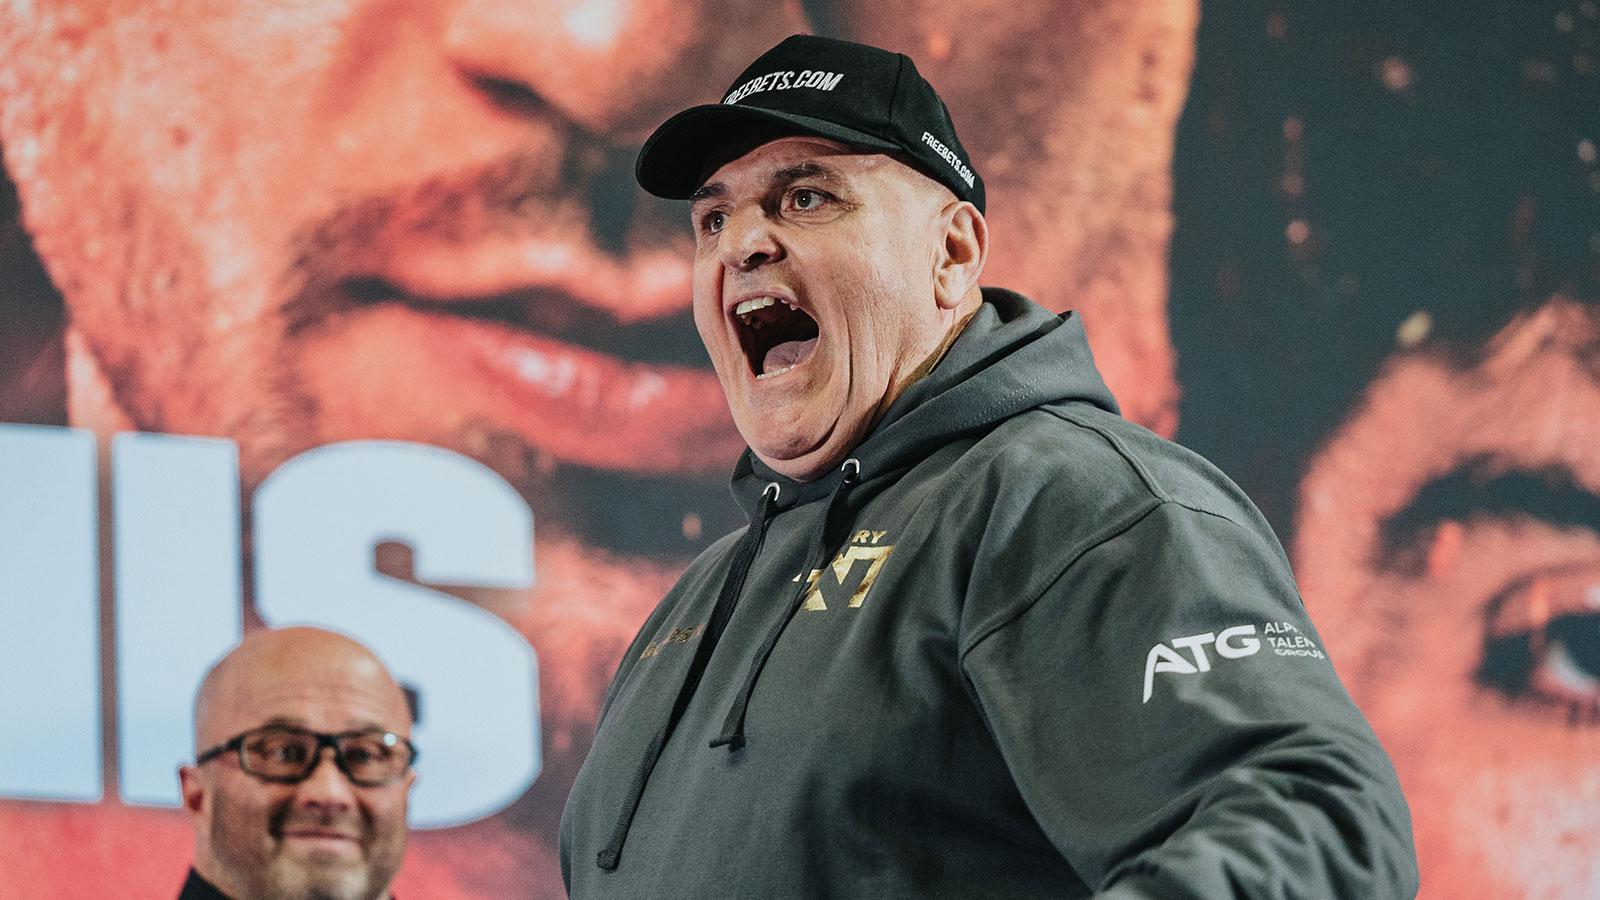 John Fury shouting on stage at Prime Card press conference